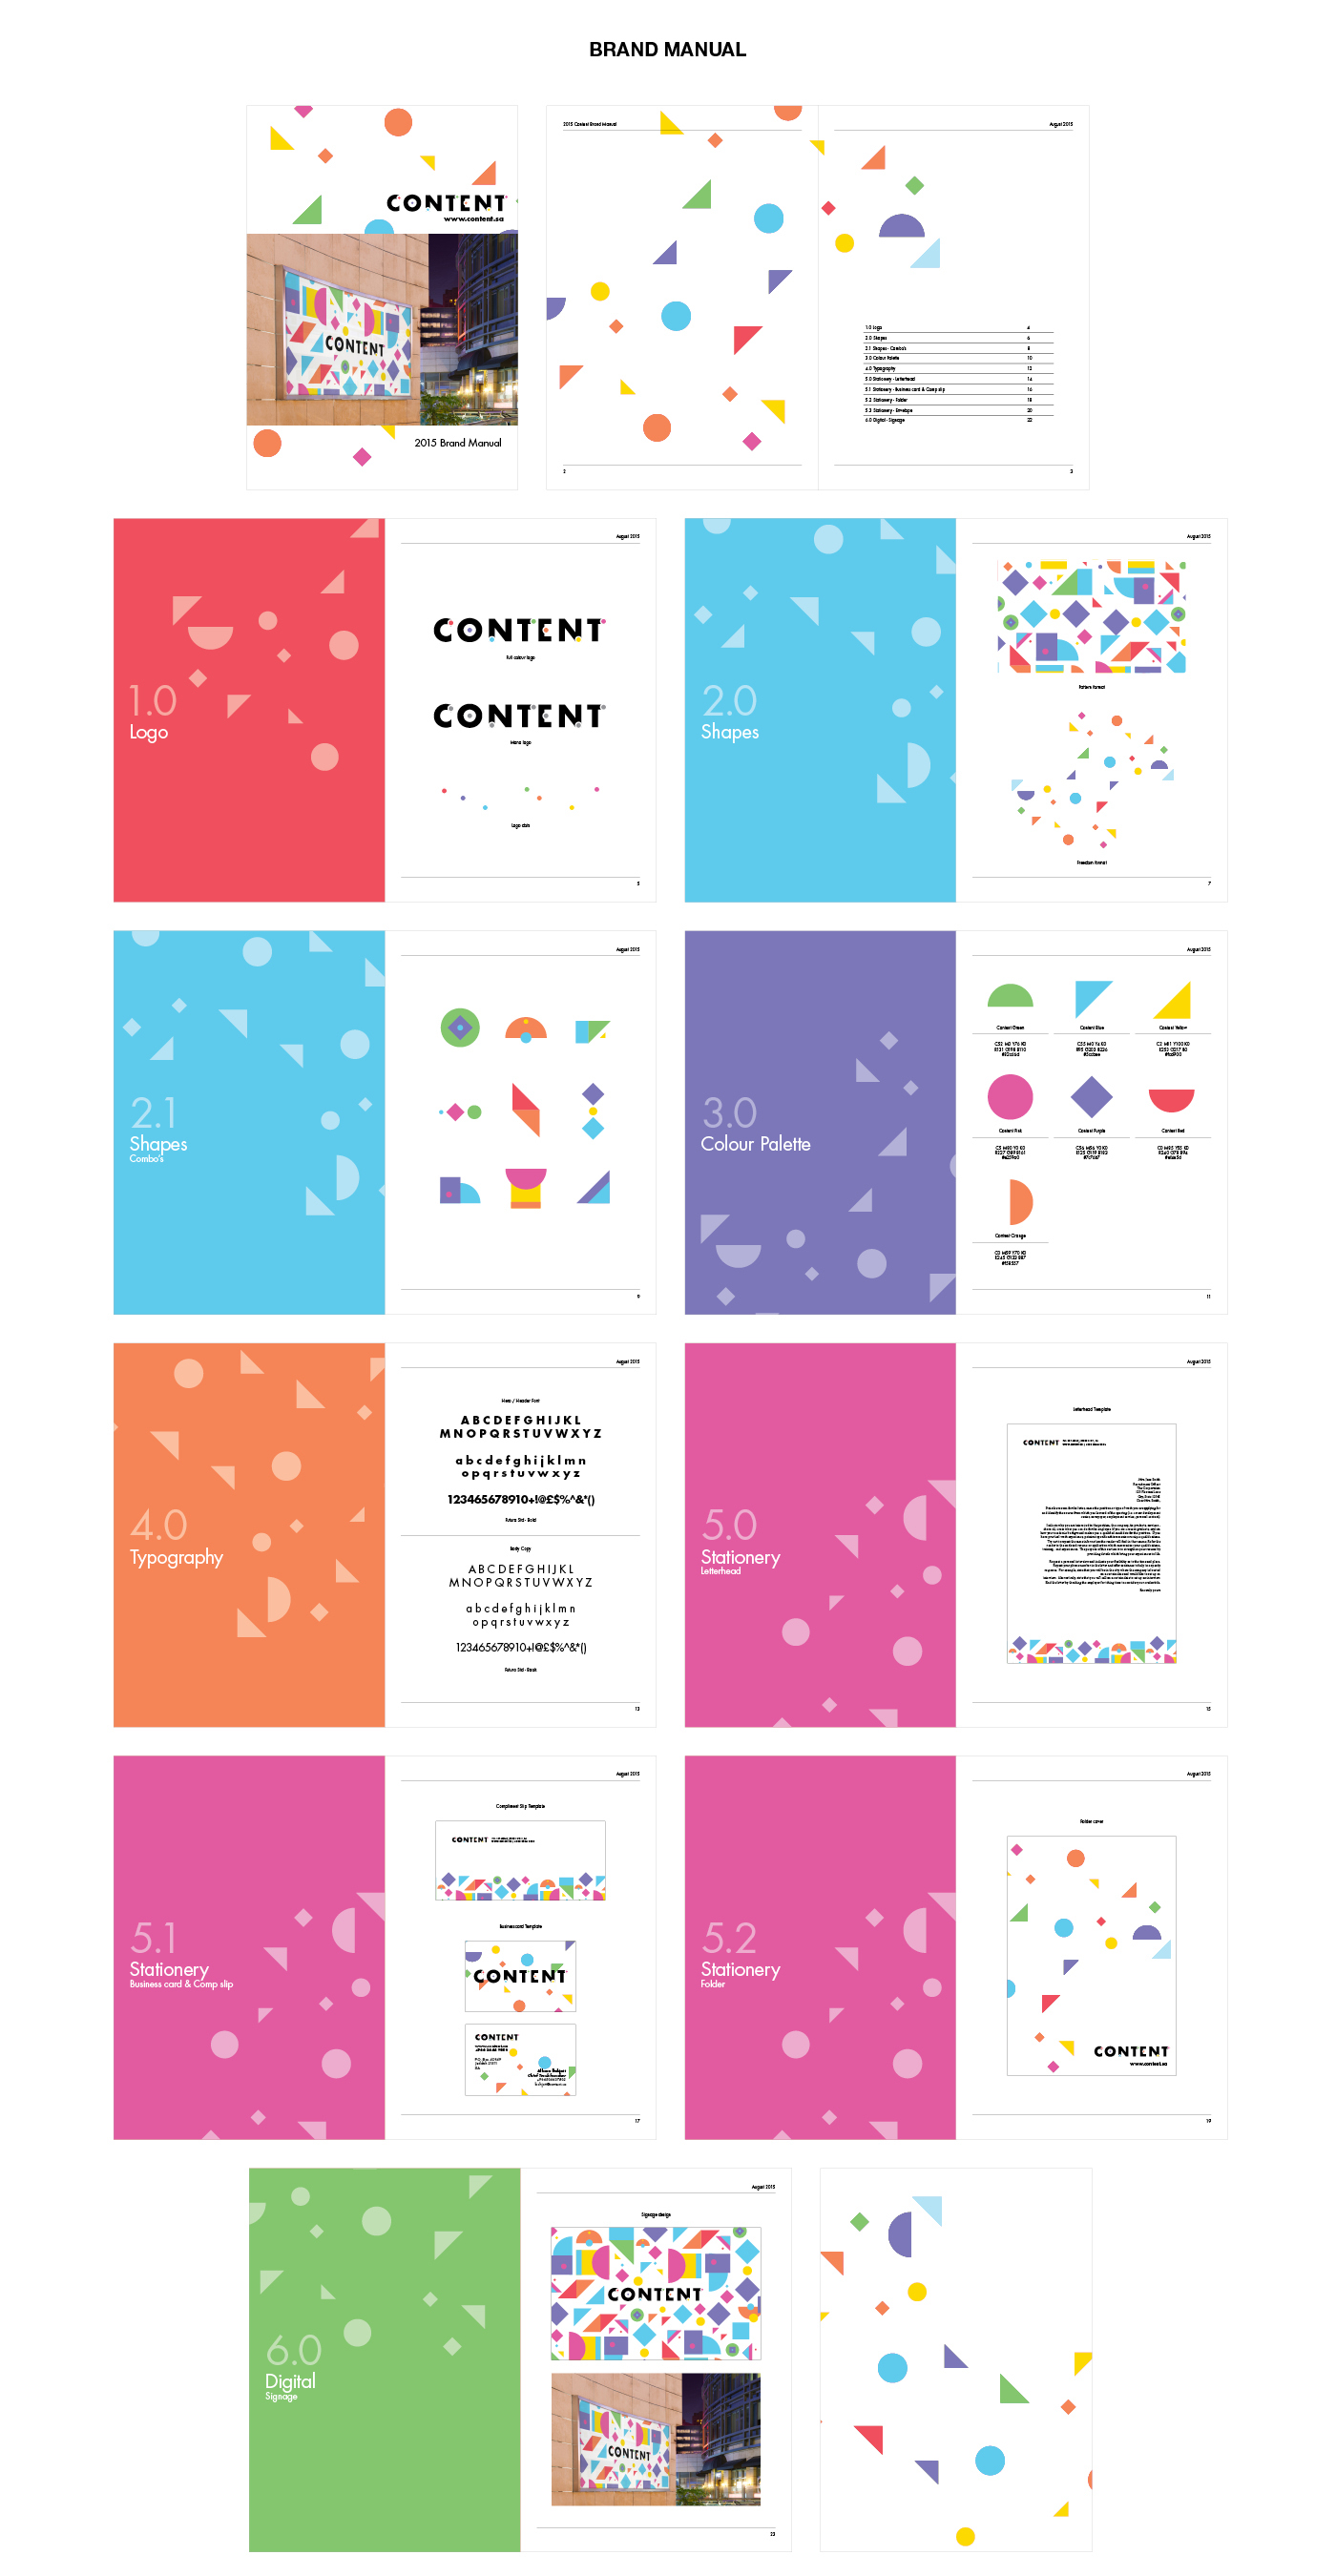 brand colour color shapes icons content Stationery brochure guidelines logo identity type logmark mark iconography